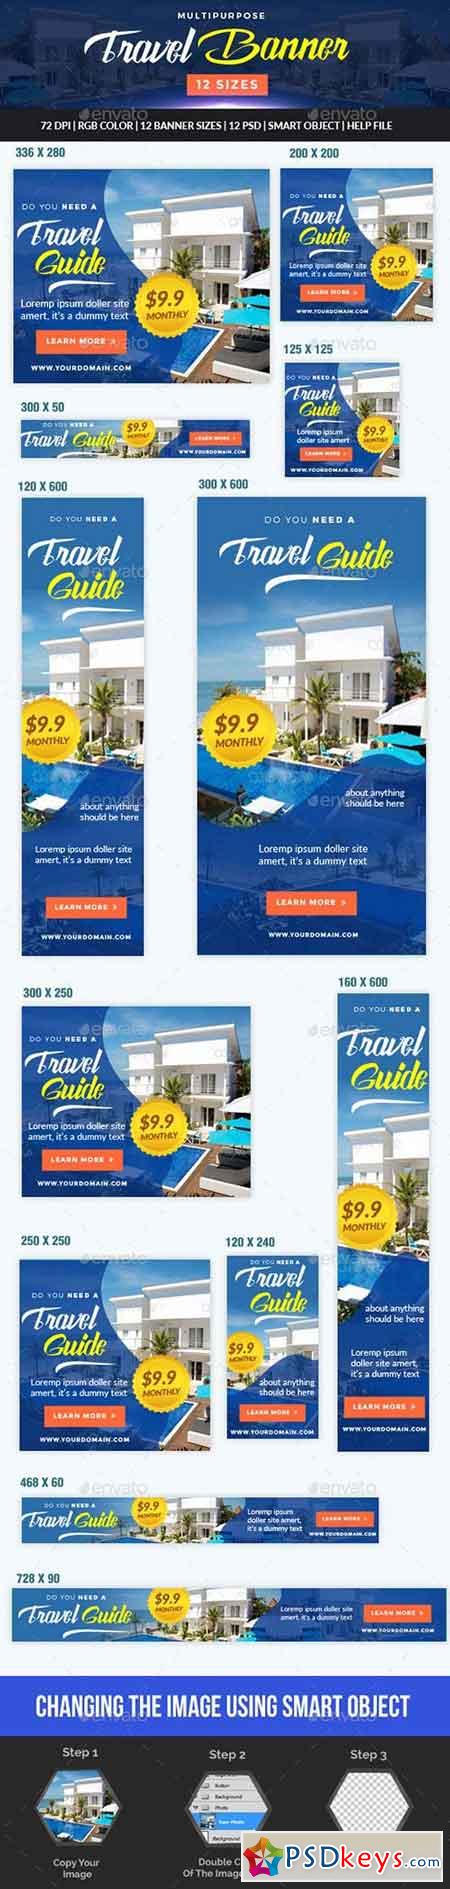 Multipurpose Travel and Hotel Banner 17537951